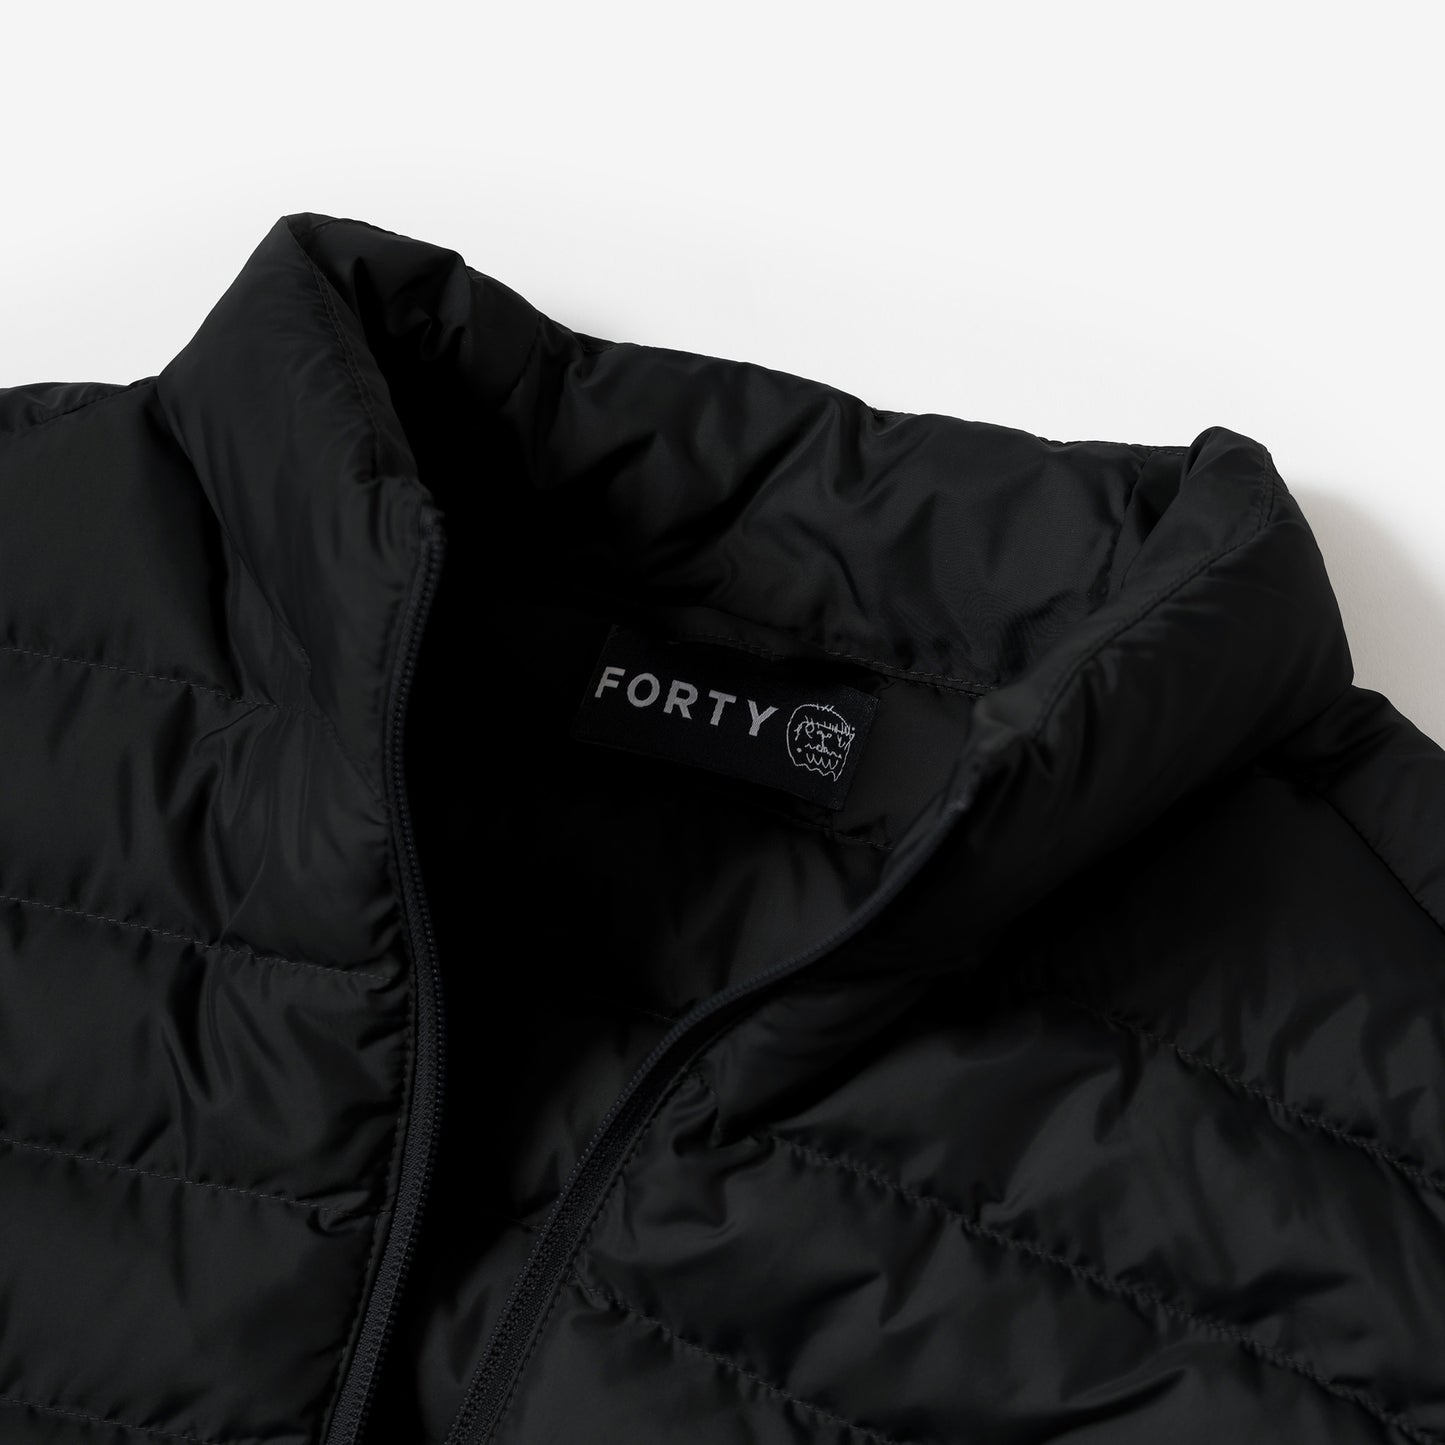 FORTY Kelso Gilet (Black) xccscss.